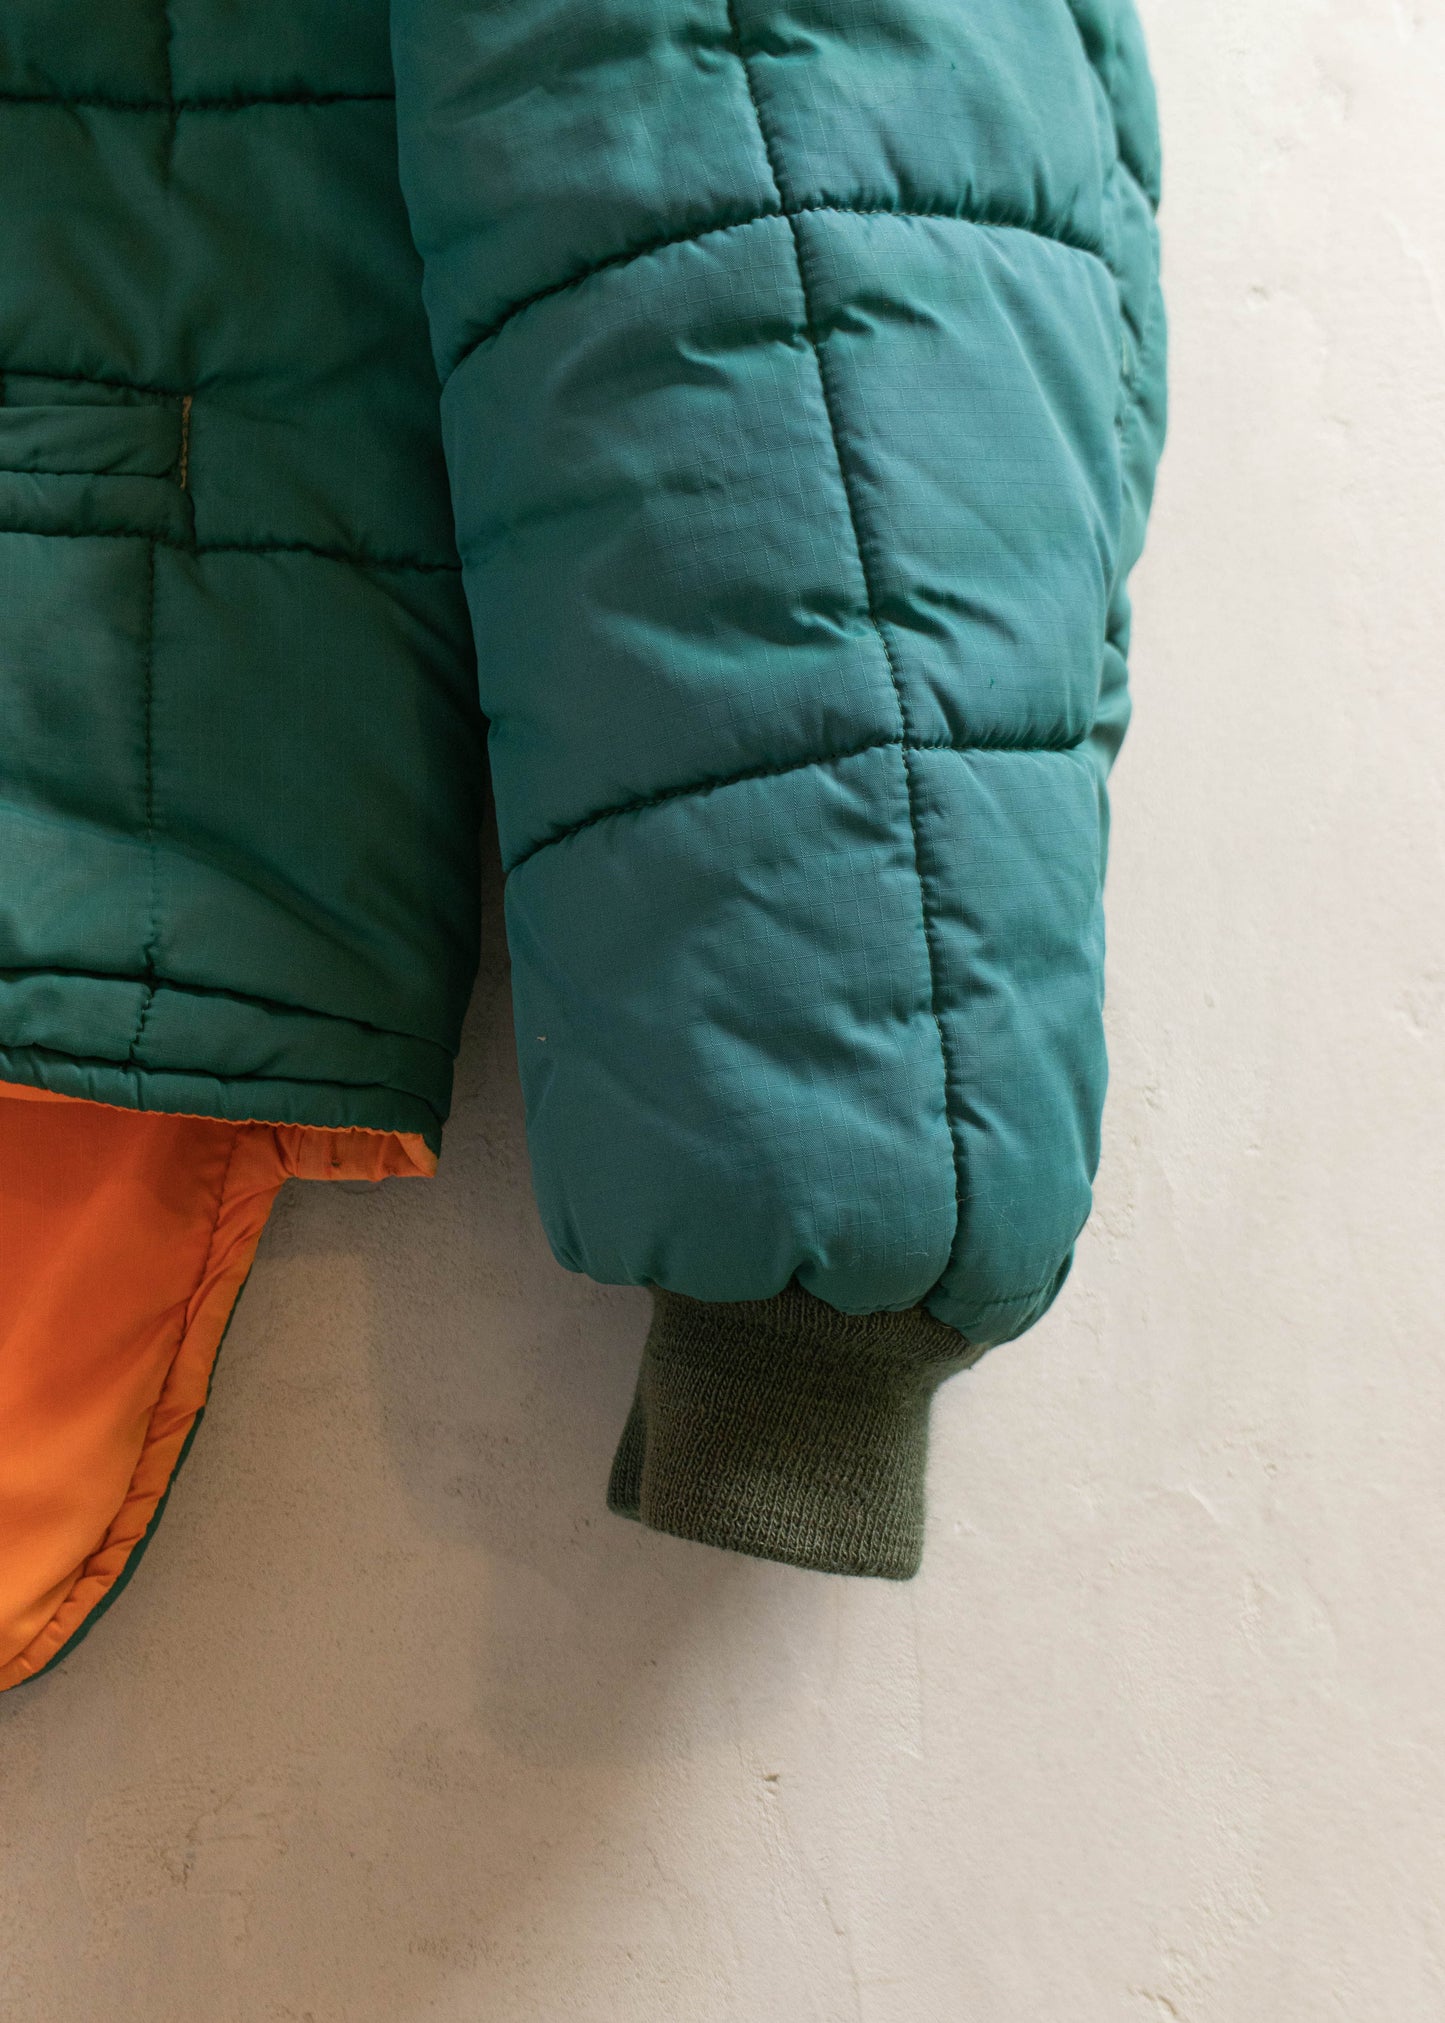 1980s Reversible Nylon Quilted Jacket Size M/L